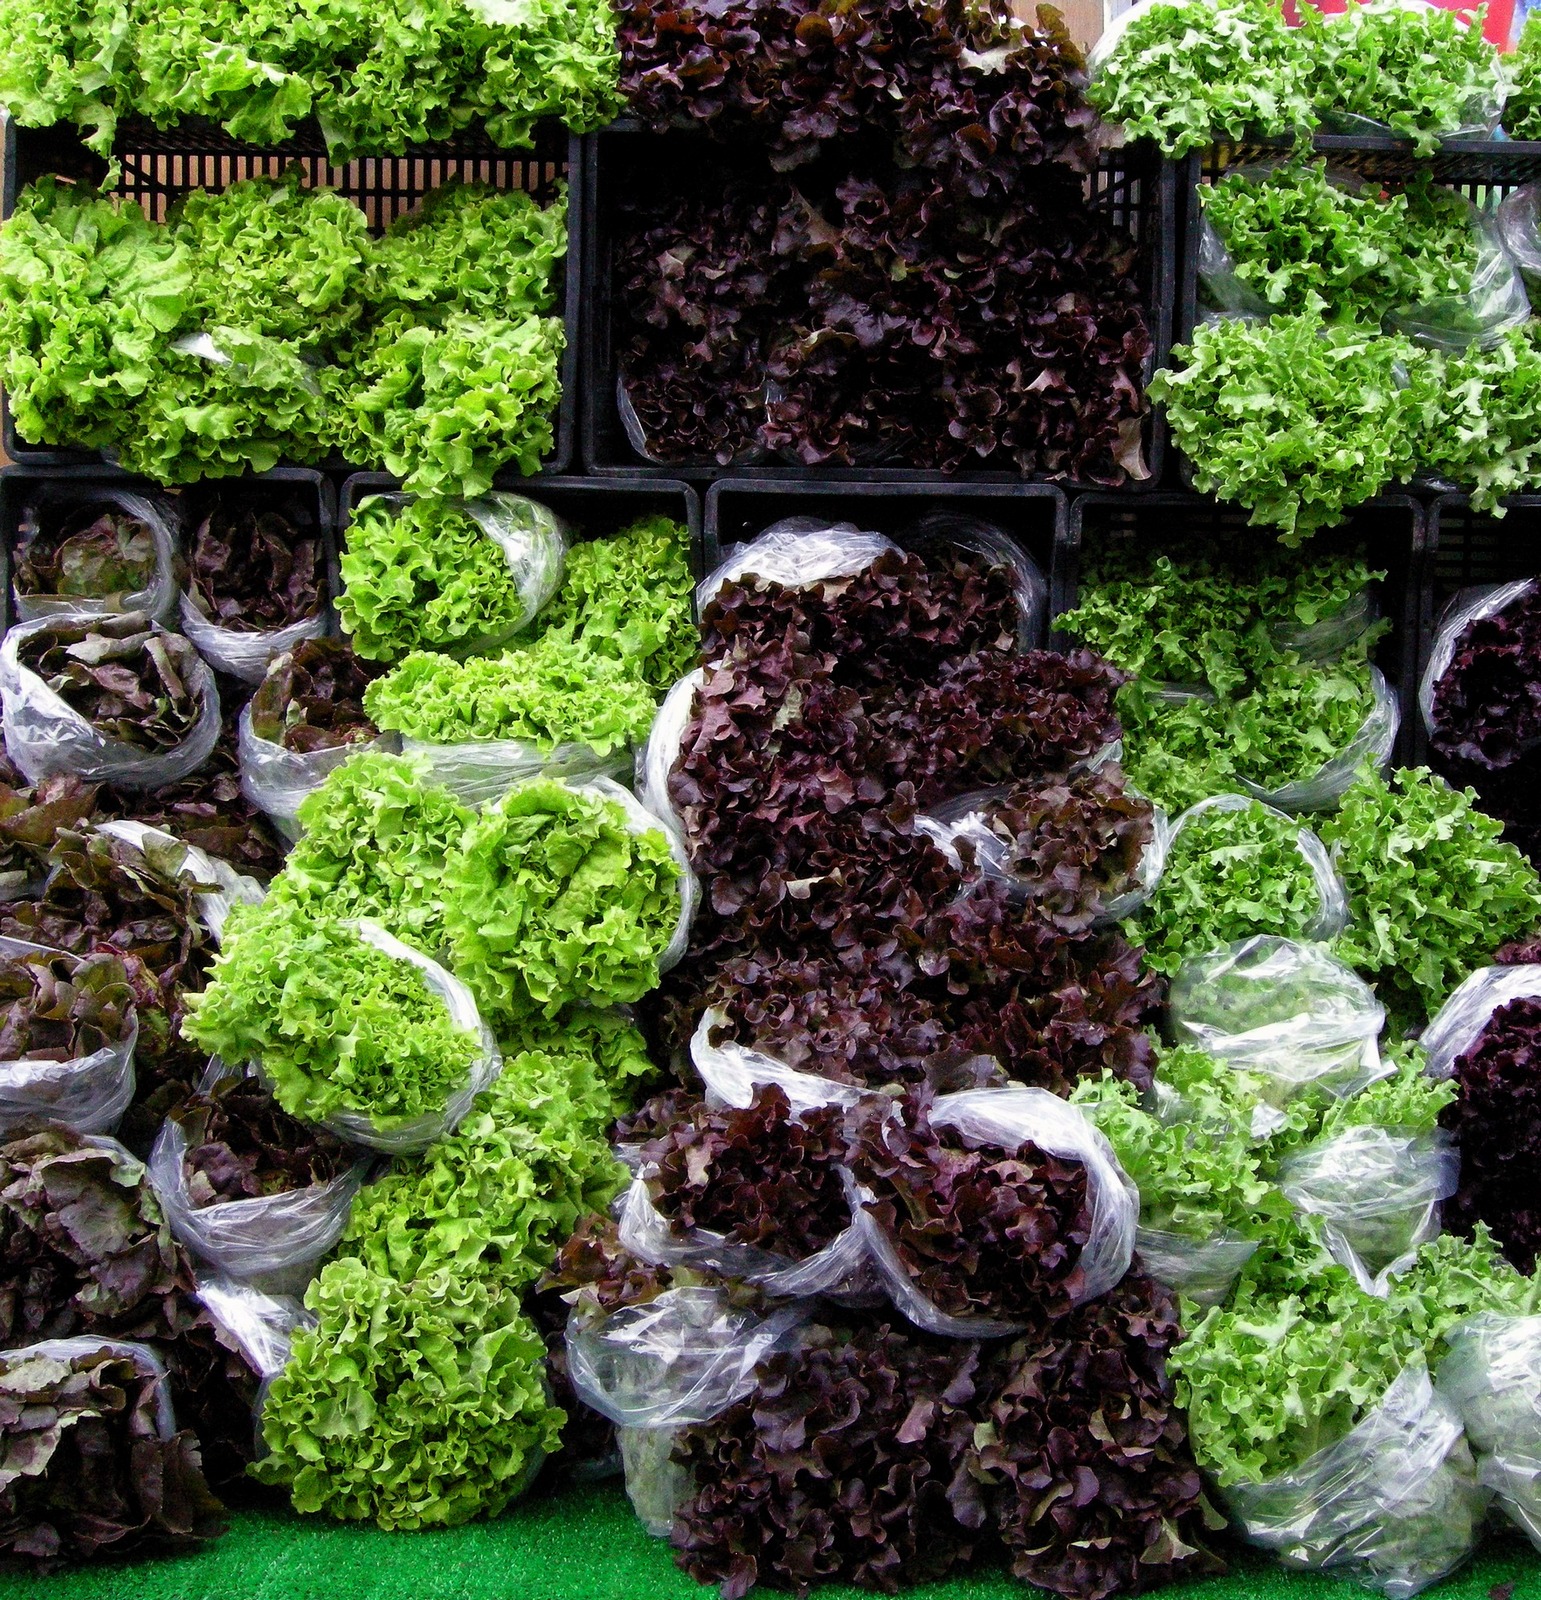 Blog Post Photo of Lettuce Display Trout Lake Farmers Market. Also Used in Chicken, Brie, Mandarin Salad